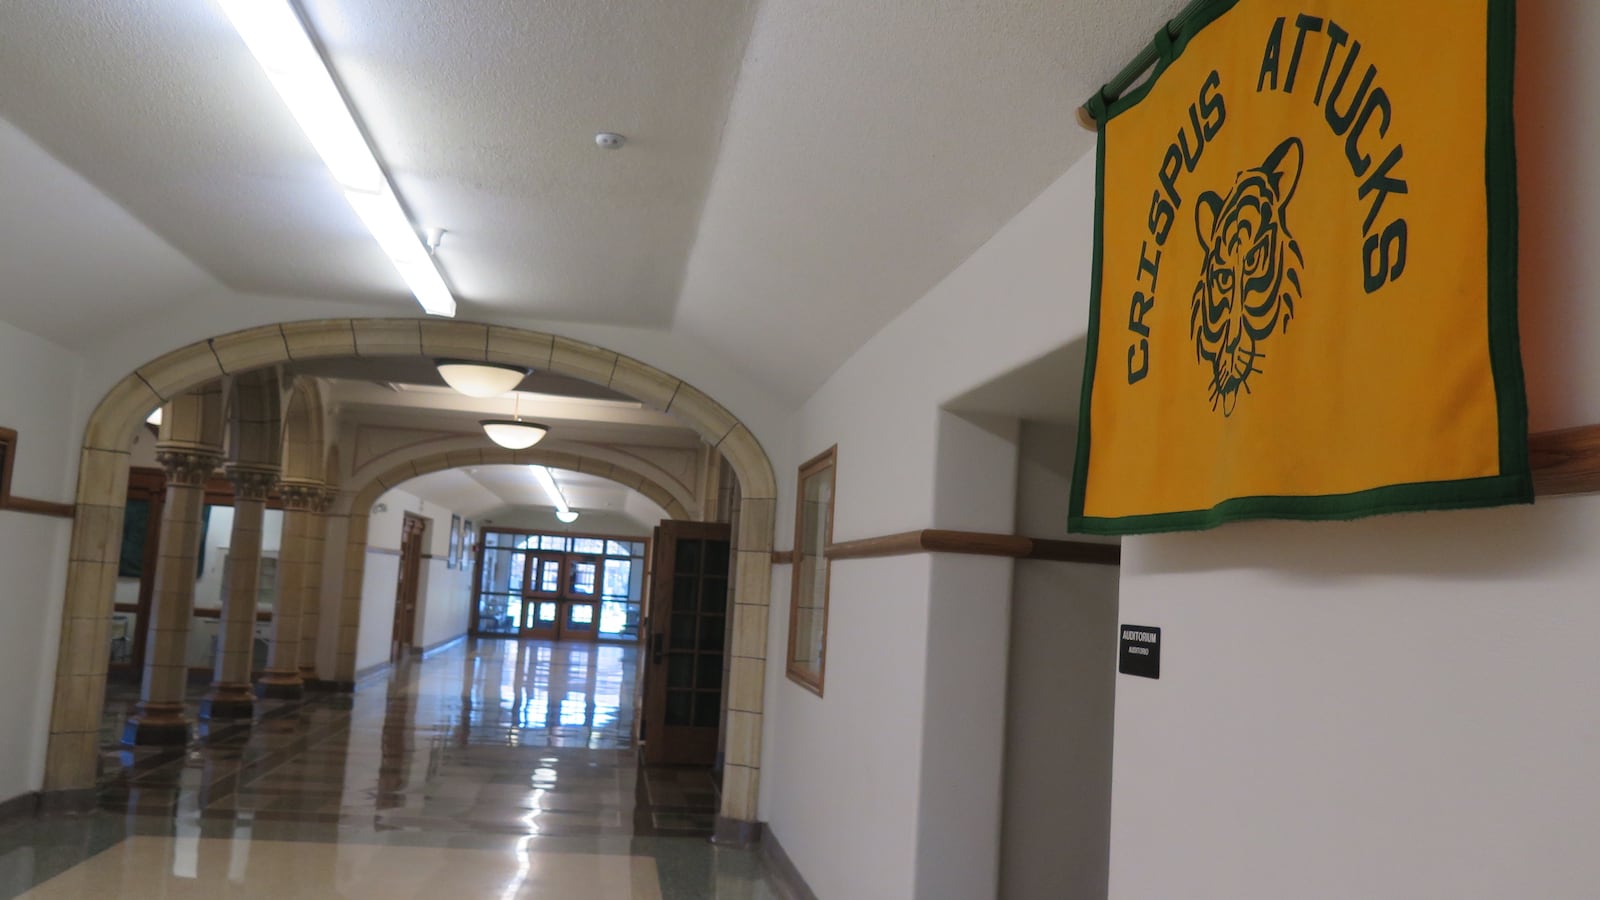 It would be a surprising move if IPS leaders decided to close the legendary Crispus Attucks High School.